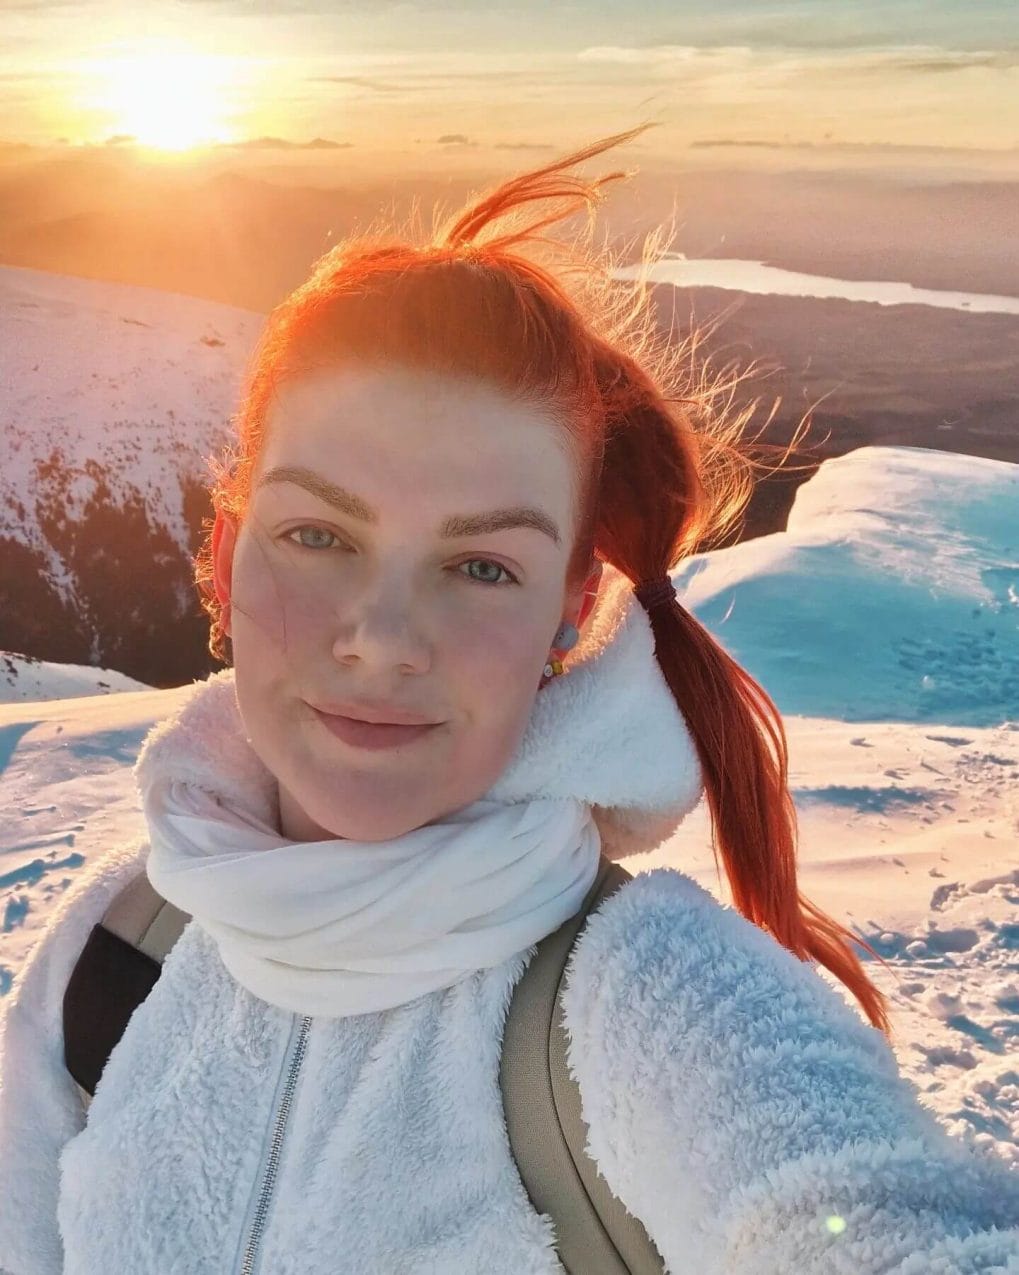 Adventurous hiker with bold red bubble ponytail against snowy landscape